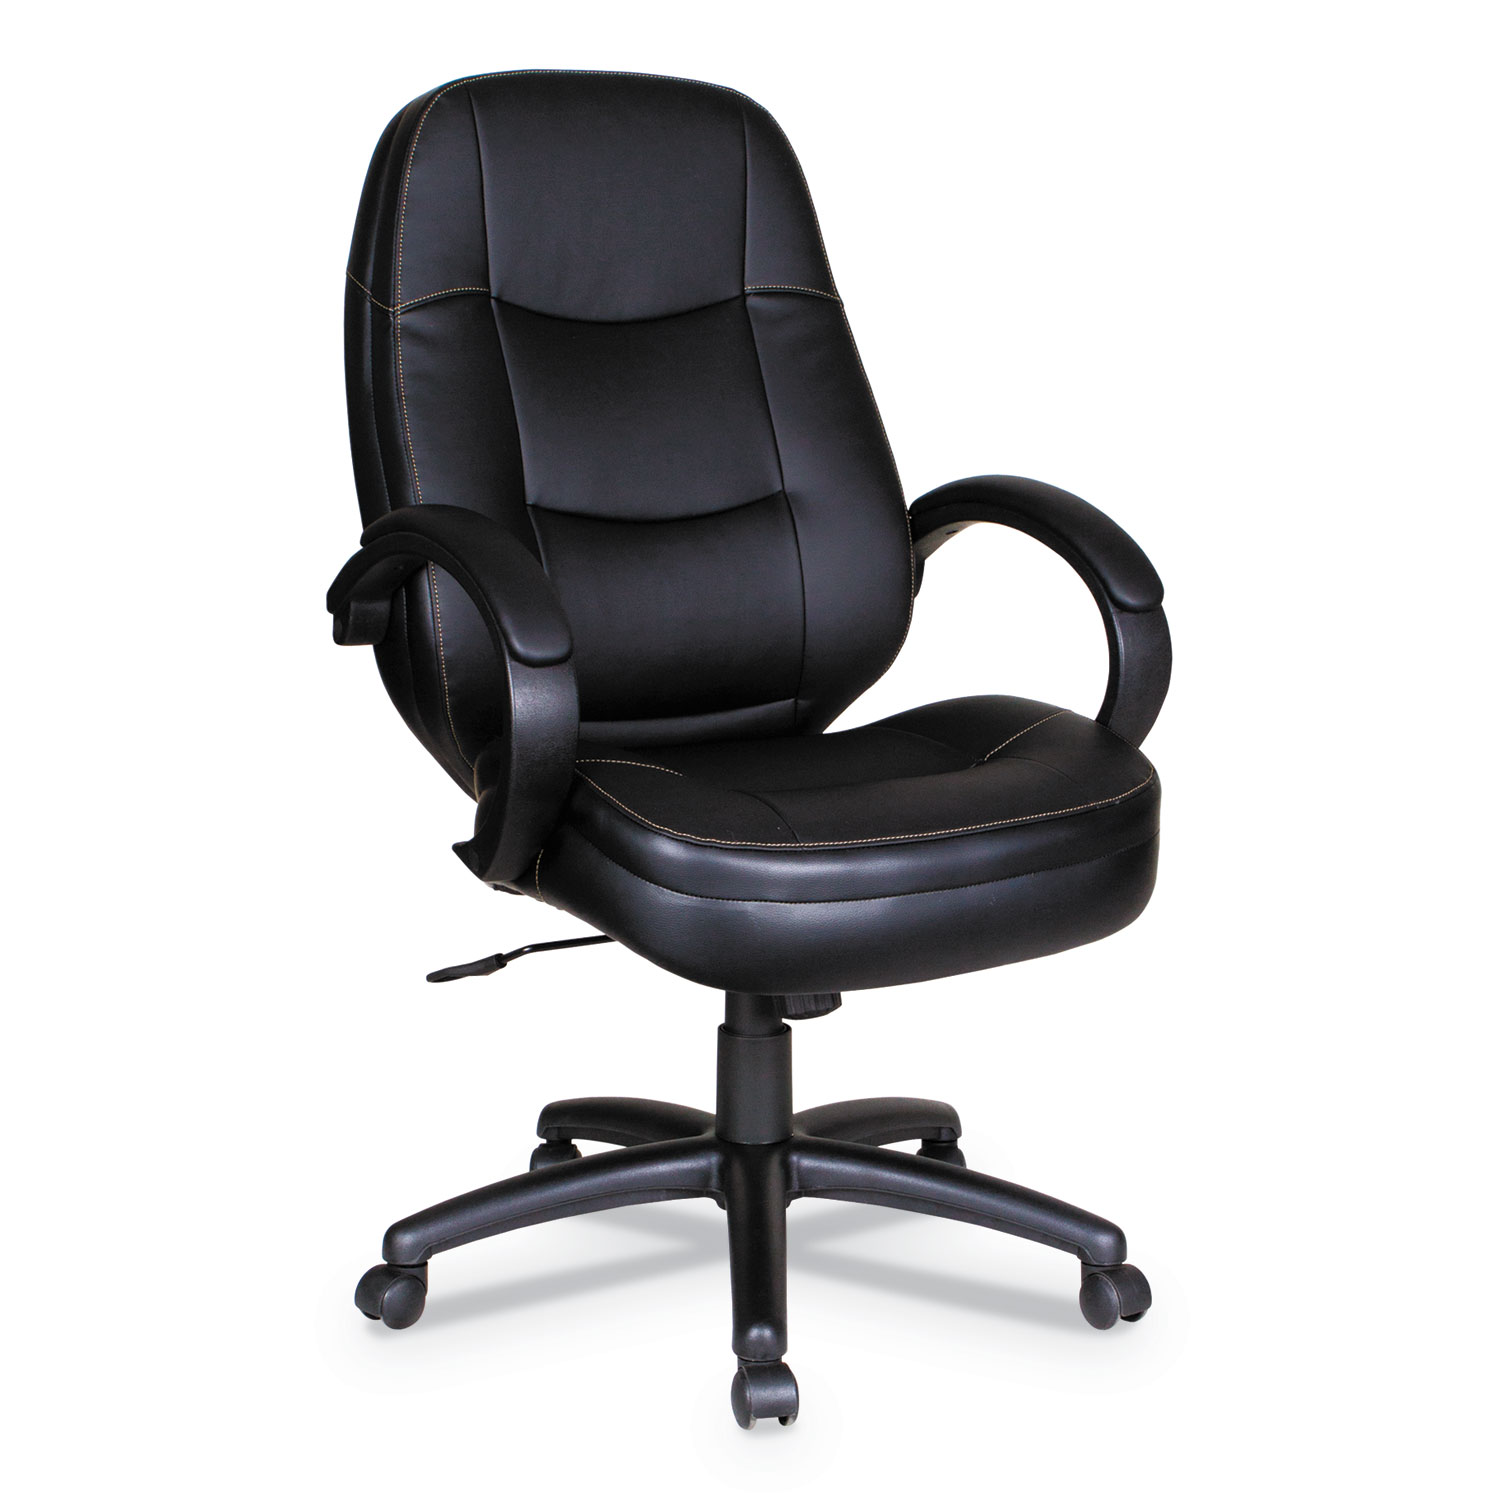  Alera ALEPF4119 Alera PF Series High-Back Leather Office Chair, Supports up to 275 lbs., Black Seat/Black Back, Black Base (ALEPF4119) 